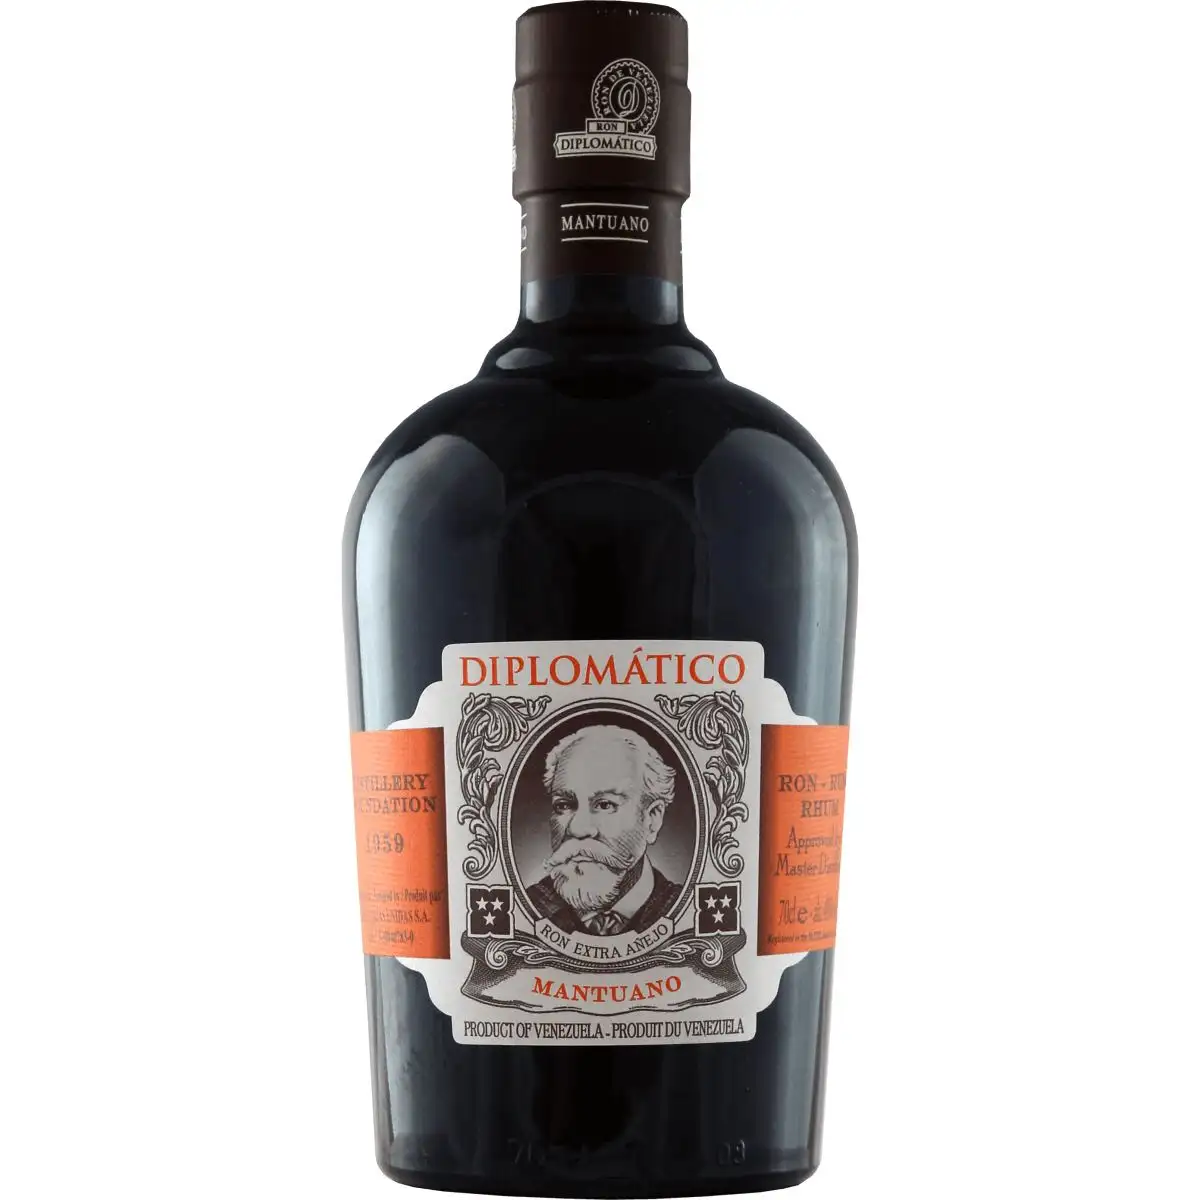 Image of the front of the bottle of the rum Diplomático / Botucal Mantuano